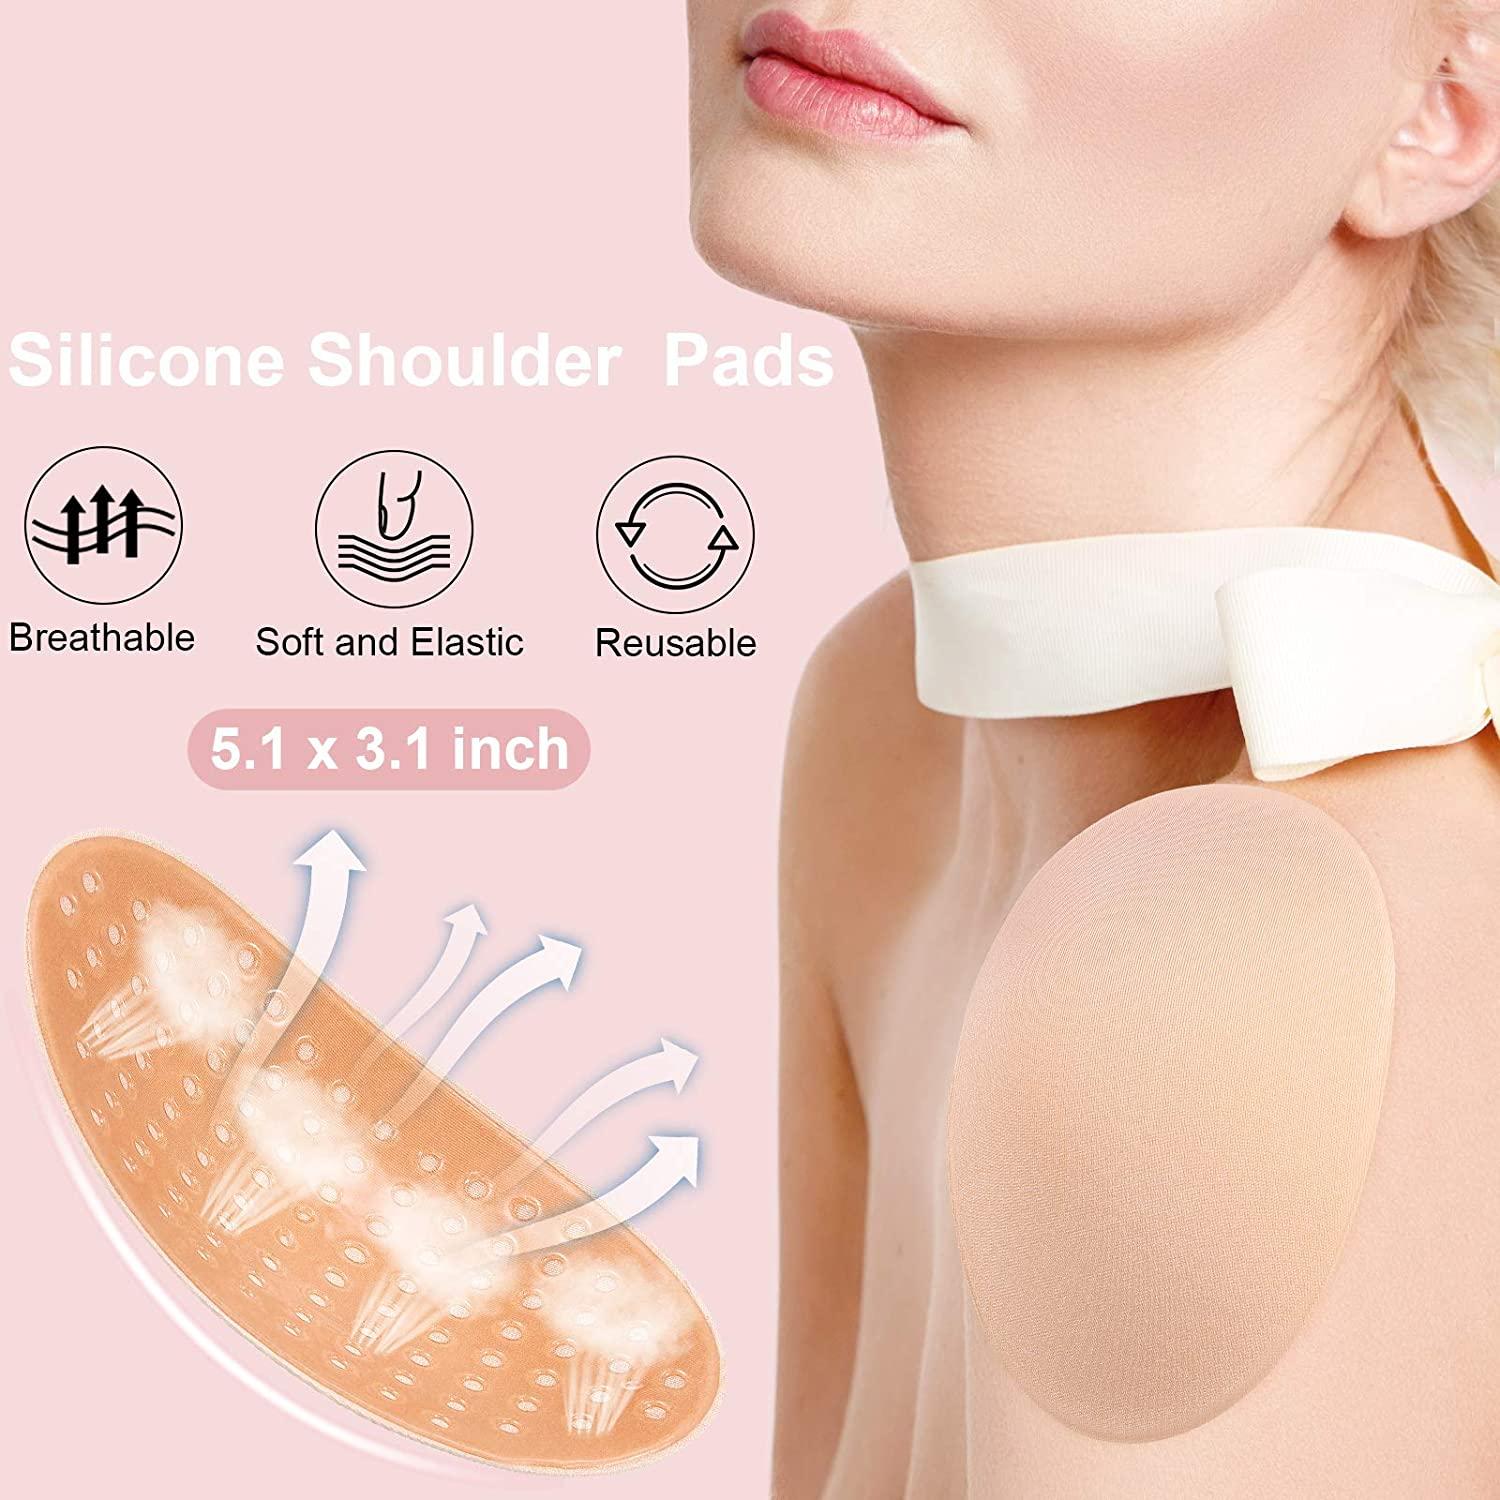 Kimaoya Silicone Shoulder Pads for Womens Clothings, Anti-Slip Shoulder Push-Up Pads, Reusable, Natural, Invisible Enhancer Shoulder Pads for